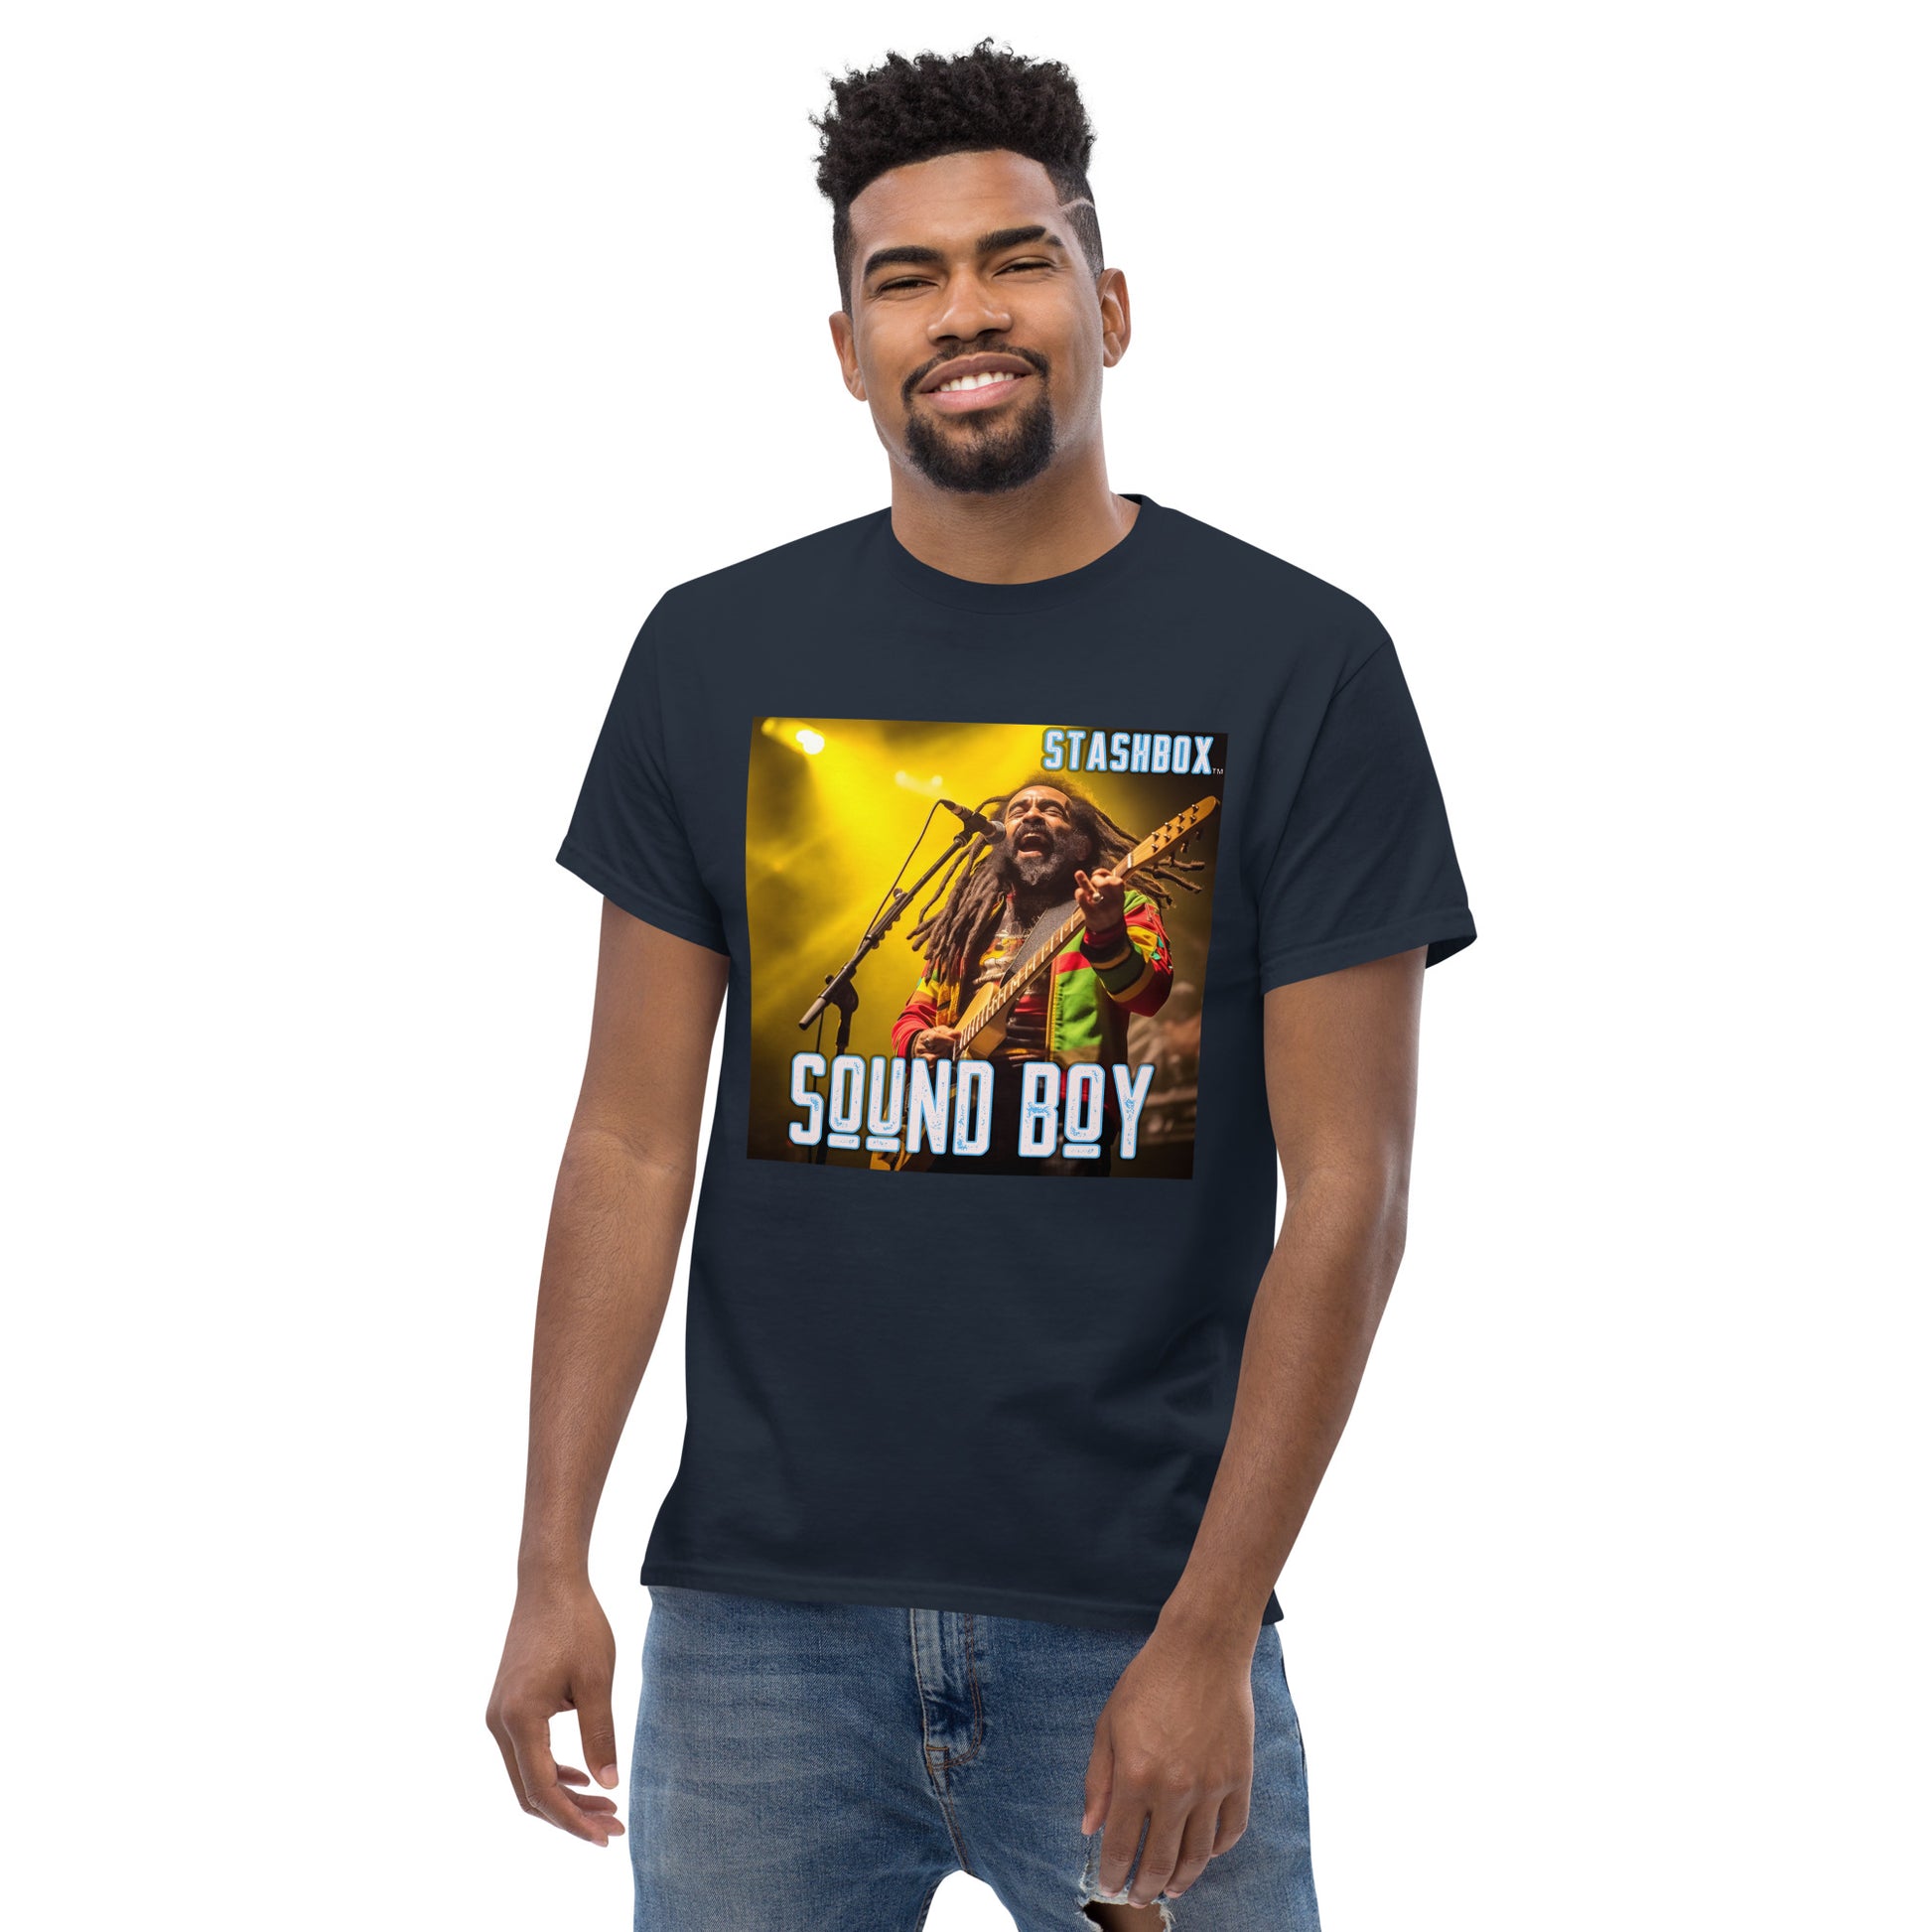 Sound Boy Rhythms: Stashbox Men's Classic Tee, Design #007 - A Fusion of Music and Fashion. Flaunt your passion for music with this trendy tee. Perfect for concerts, gigs, or casual hangouts. #StashboxMusicFashion #SoundBoyStyle #MusicalExpression